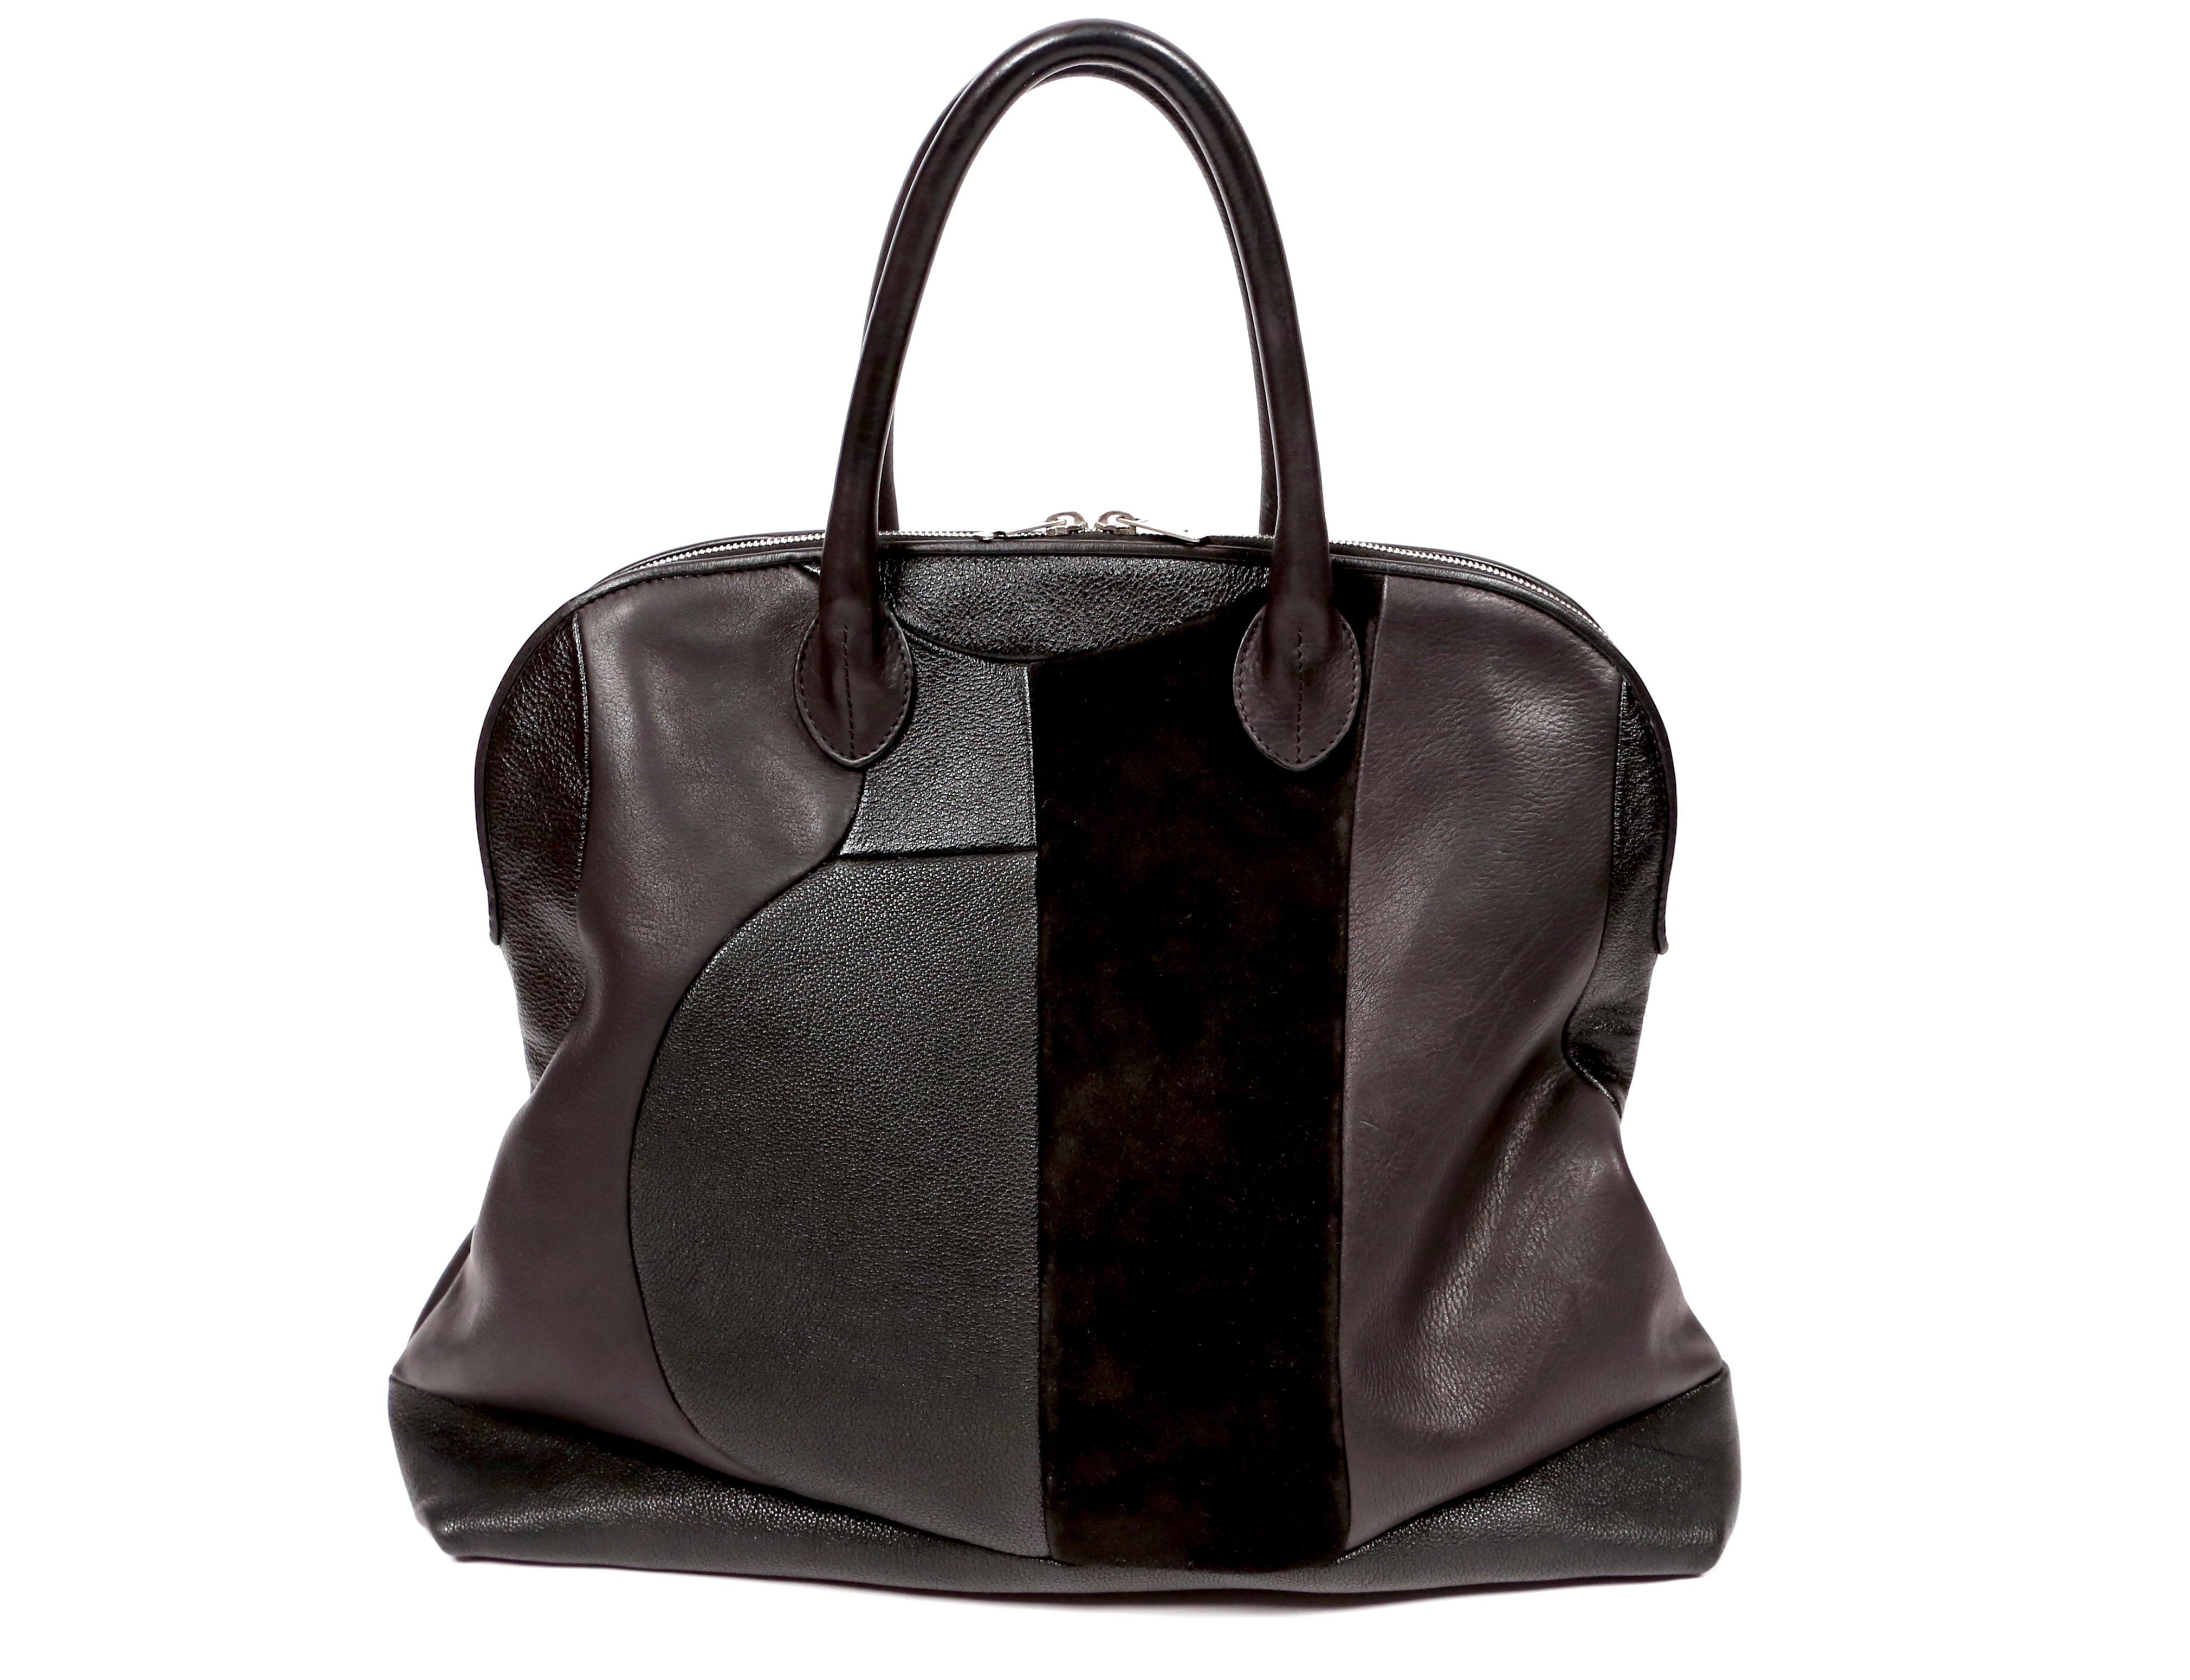 Black bowling style bag featuring different types of leather and suede in a patchwork motif designed by Phoebe Philo for Celine circa 2010. Approximate measurements: 17.5